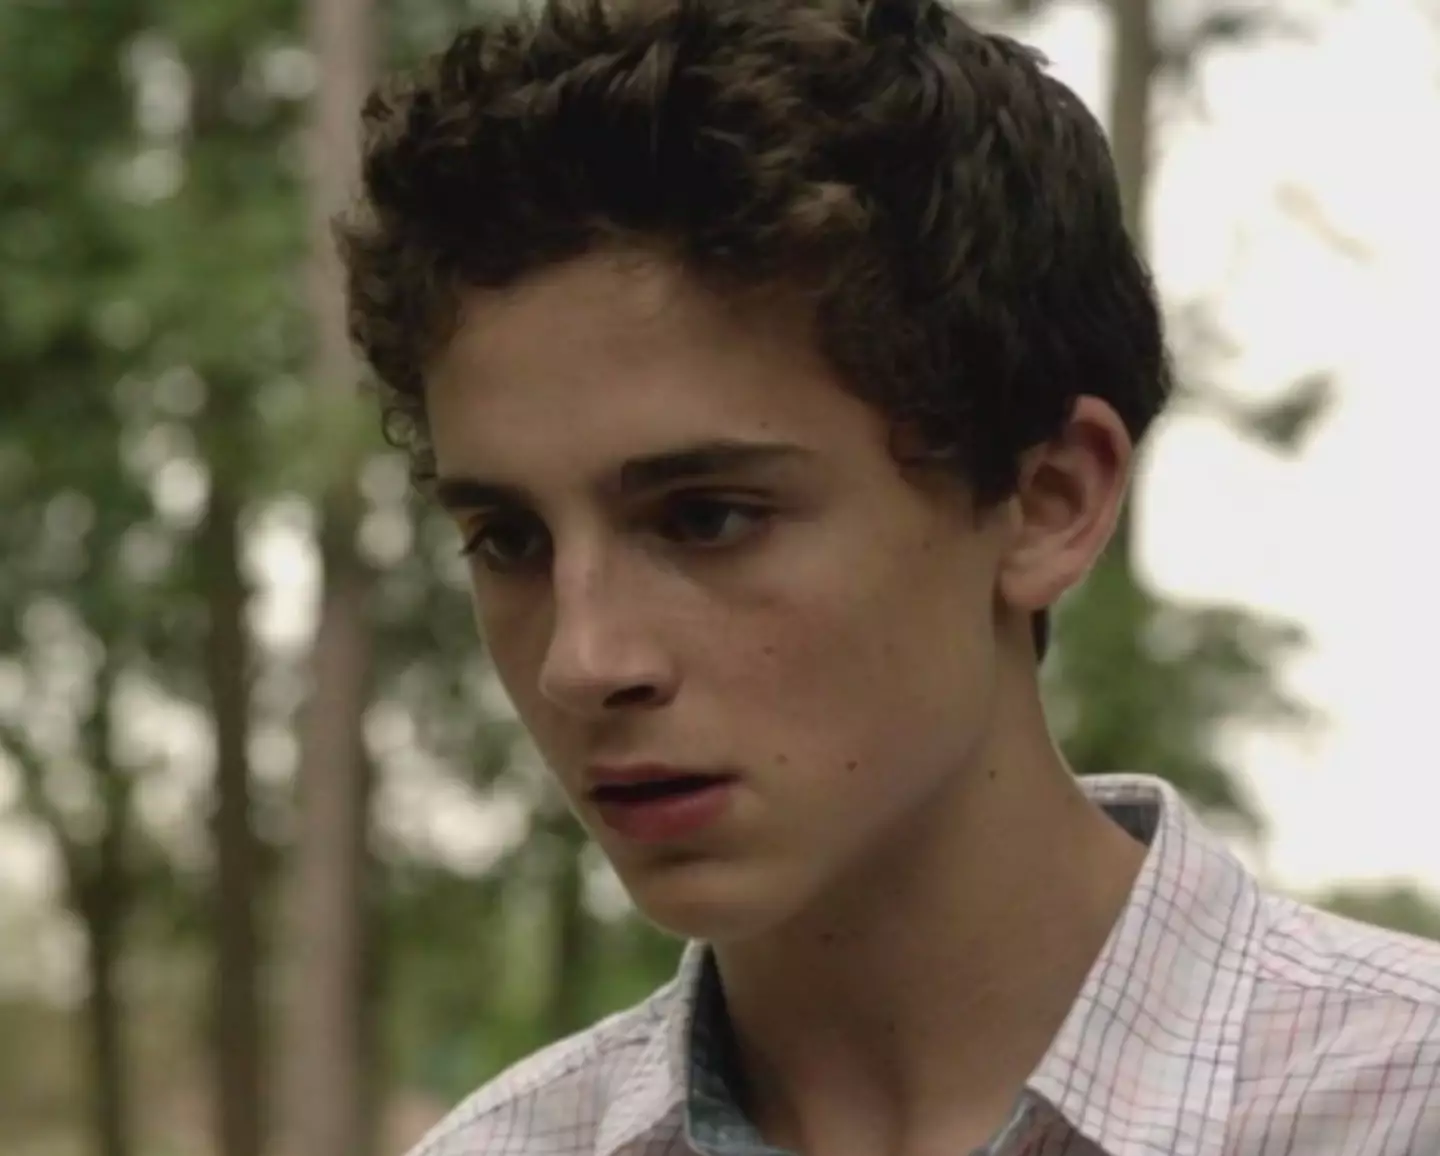 Timothee Chalamet made one of his first big acting appearances in the series.